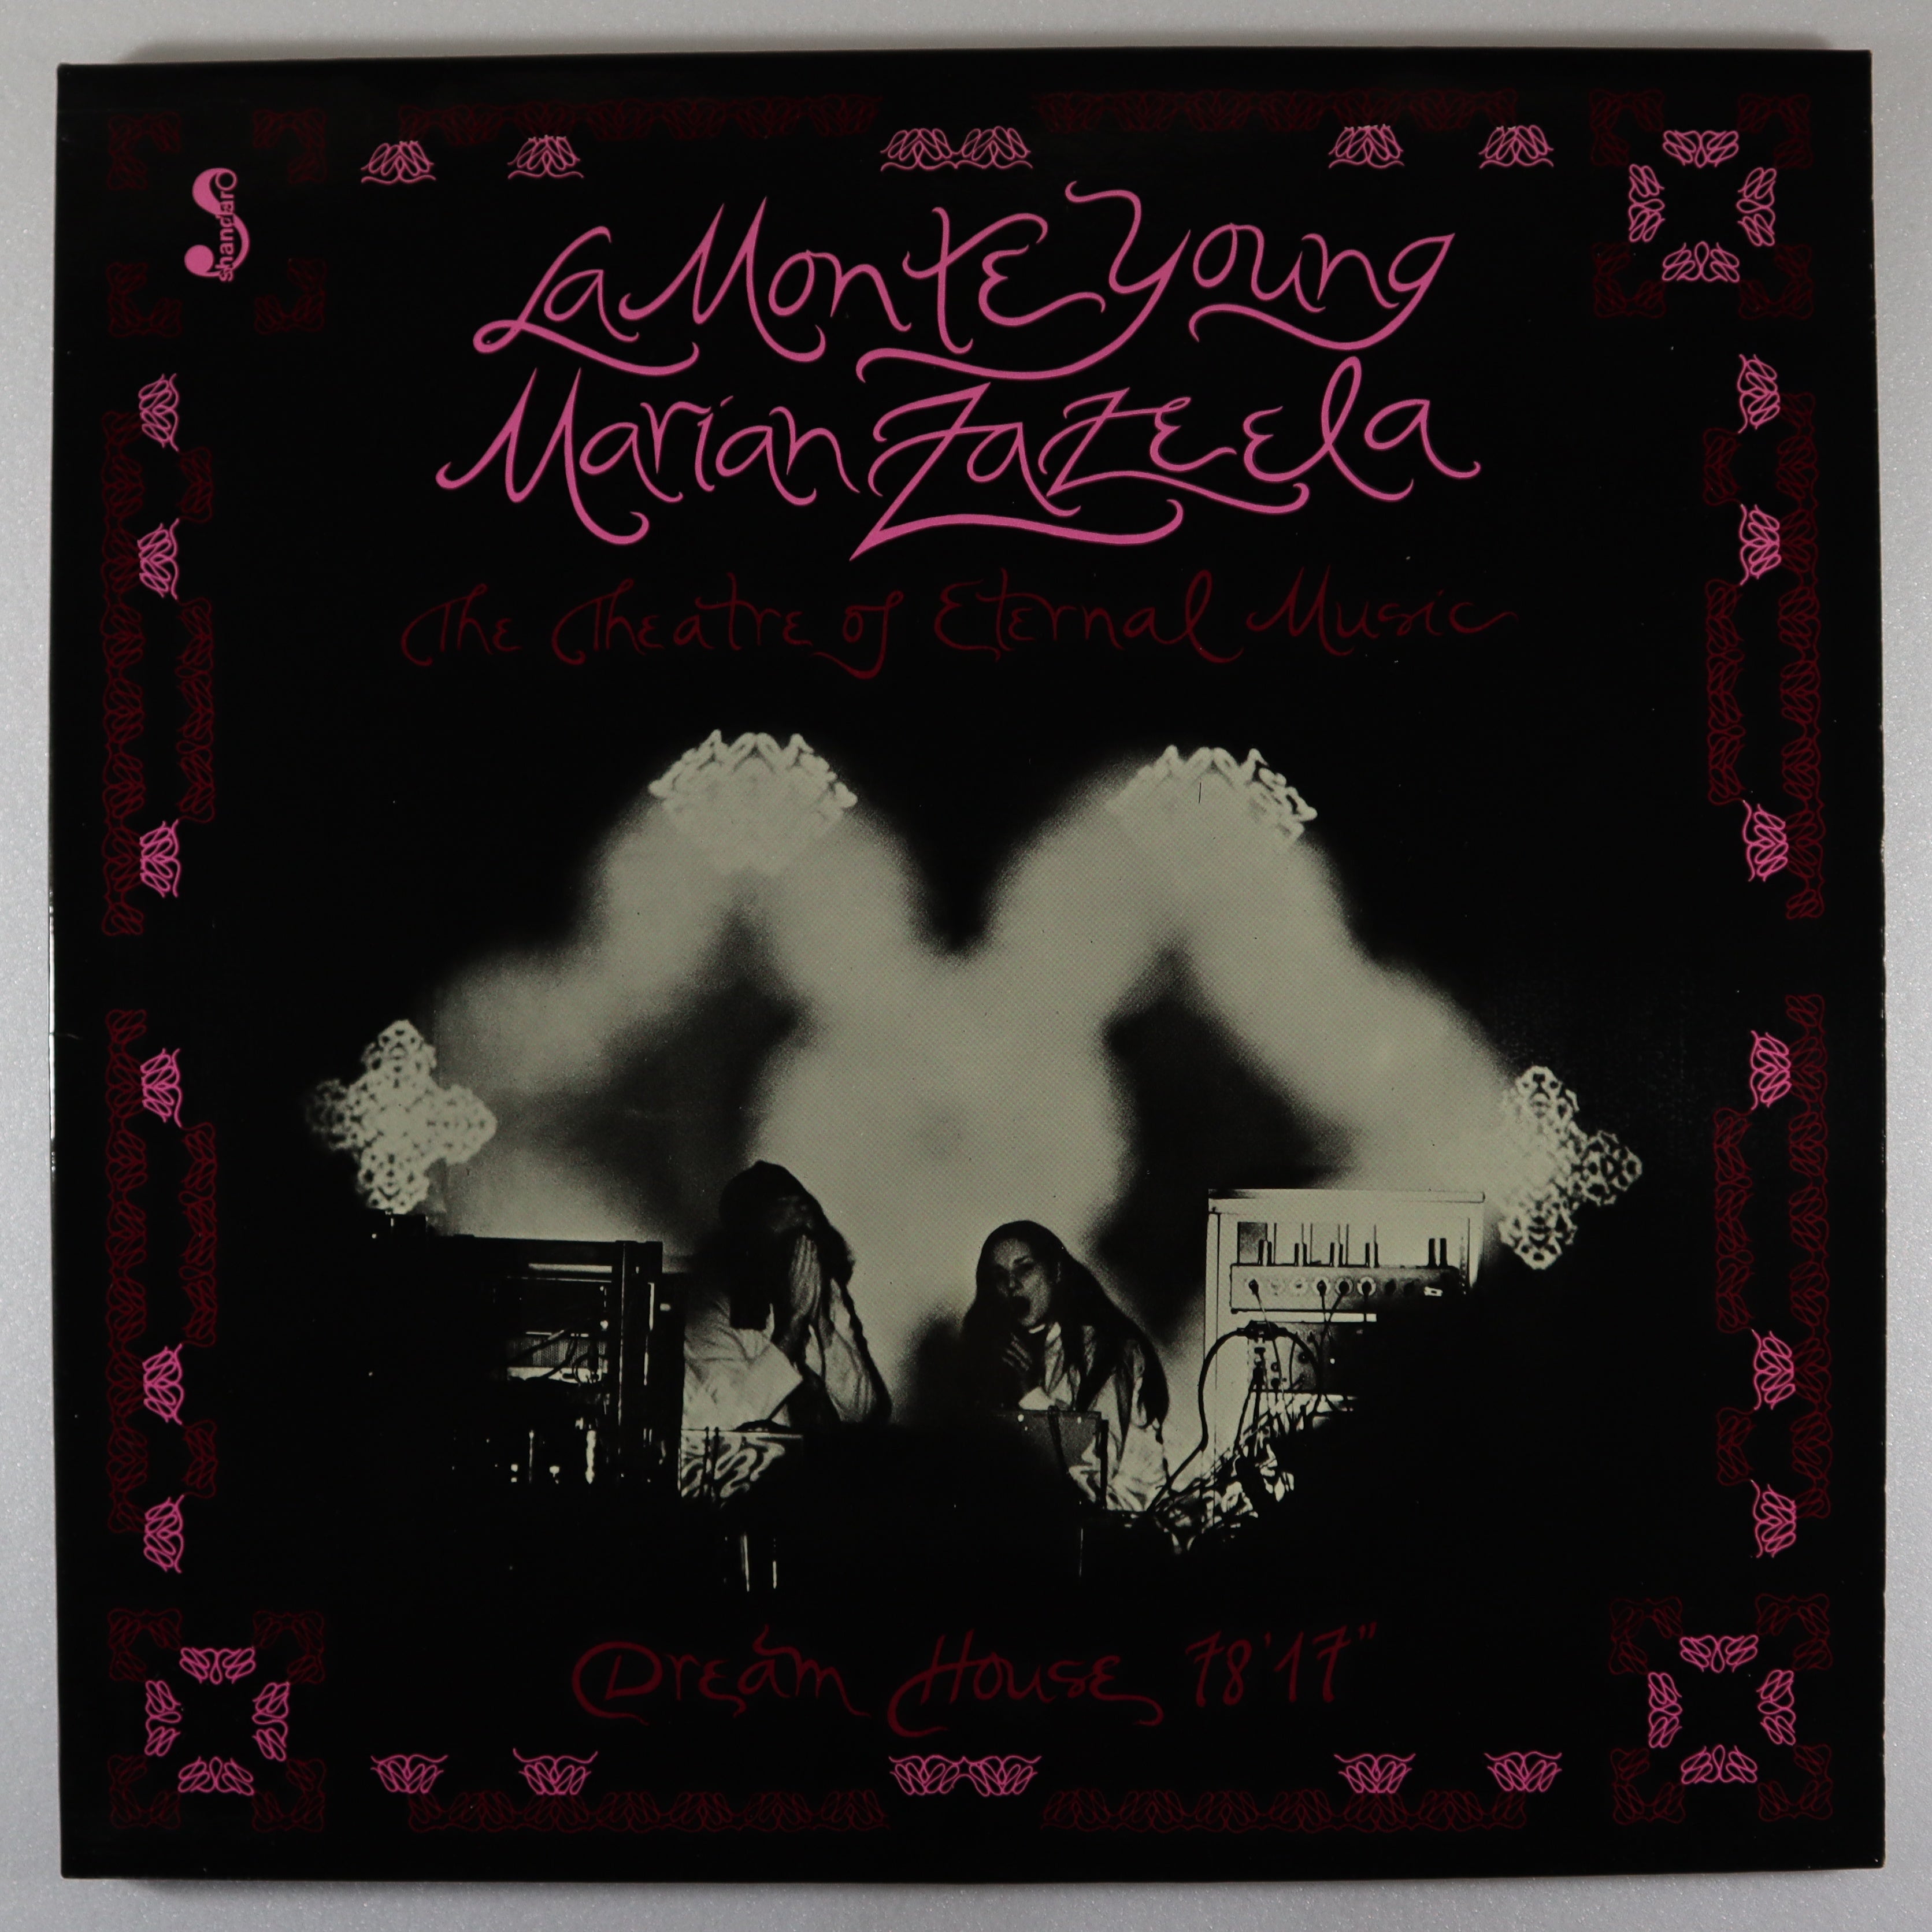 LA MONTE YOUNG MARIAN ZAZEELA – Dream house 18'17” – out there records